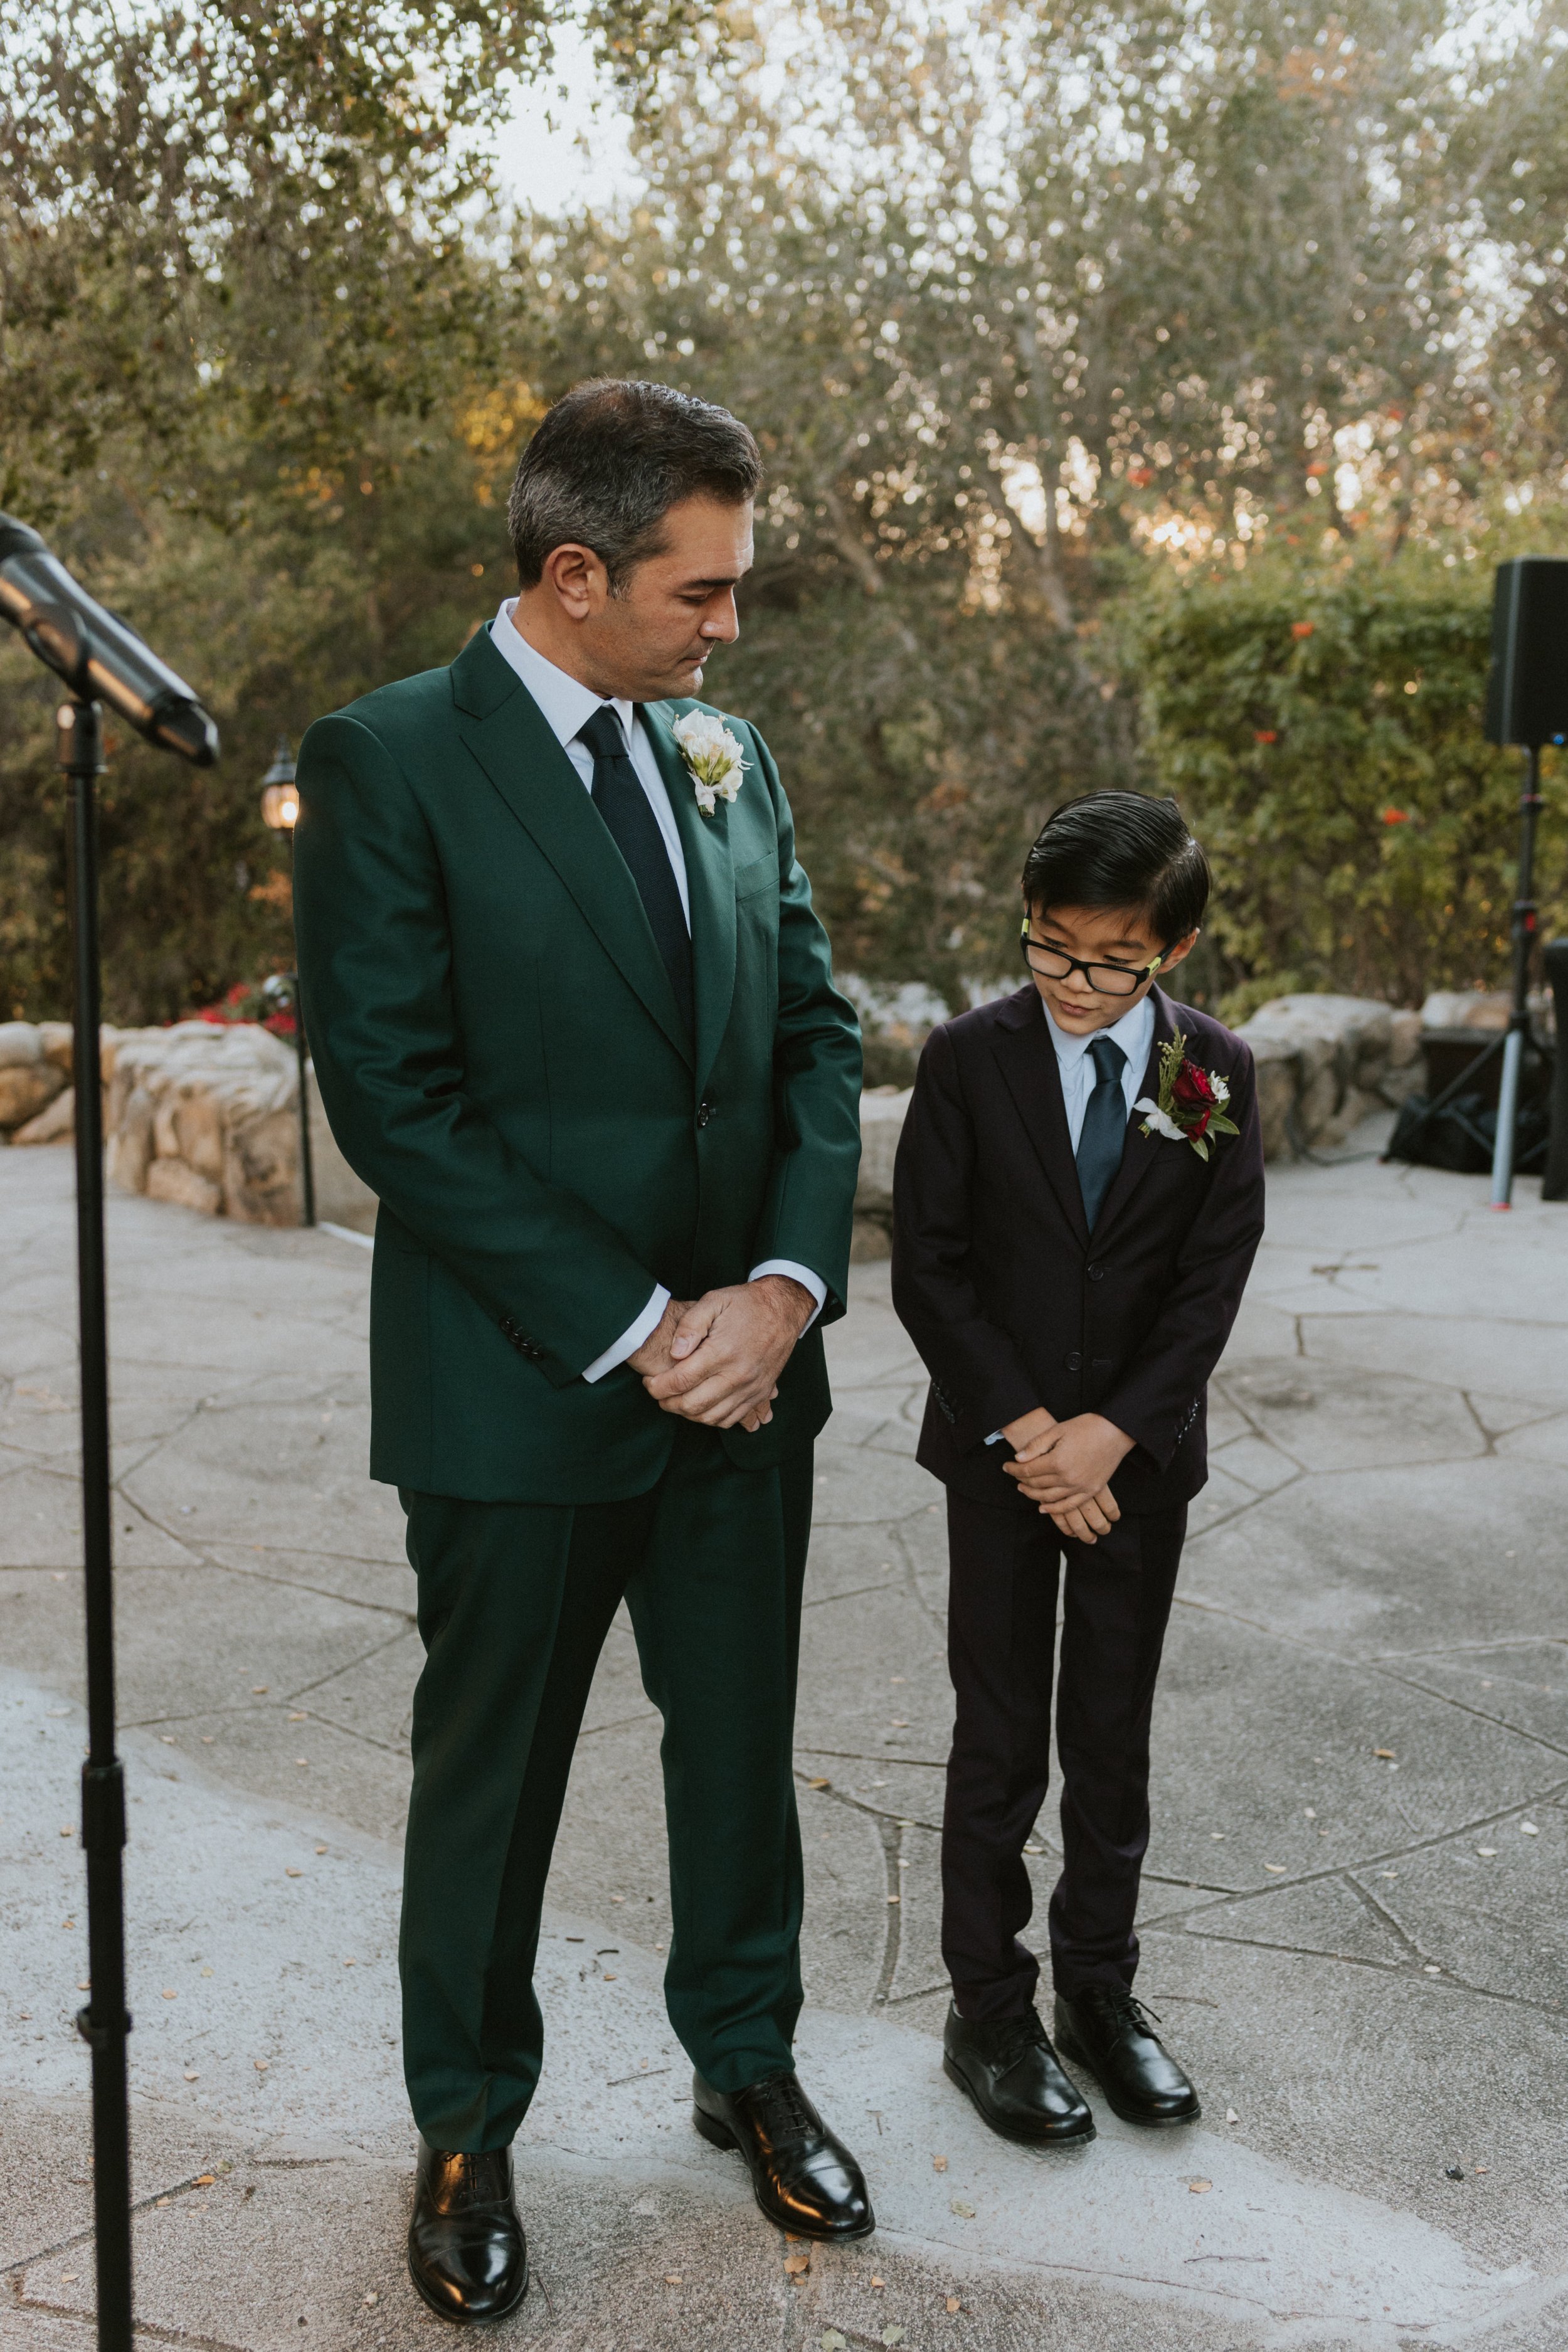 www.santabarbarawedding.com | Ann Johnson Events | SB Woman’s Club | Sarah Vendramini | Margaret Joan Florals | Town and Country Rentals | Groom and Son Standing at Ceremony